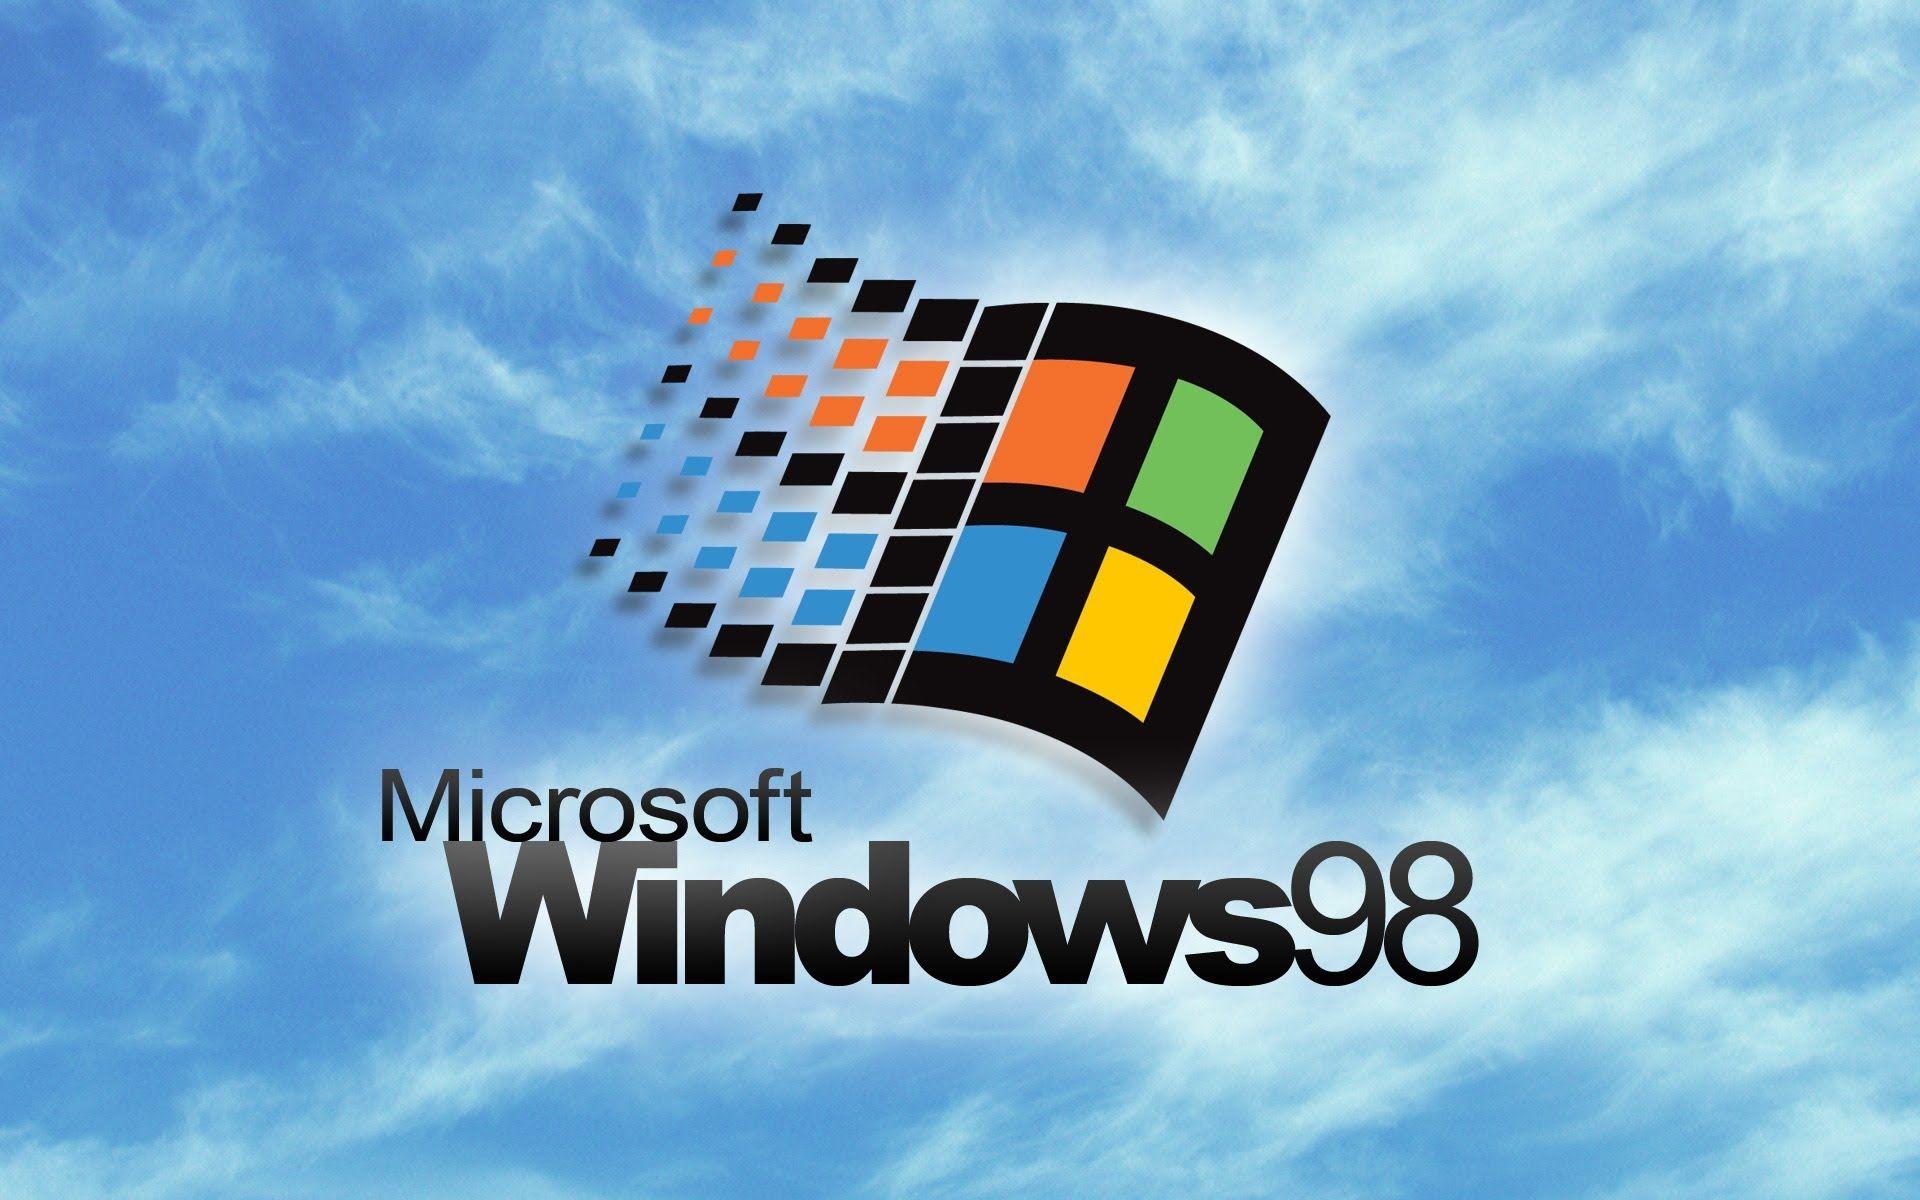 Windows 96 Logo - Is a Windows 98 machine usable in 2017? Forums